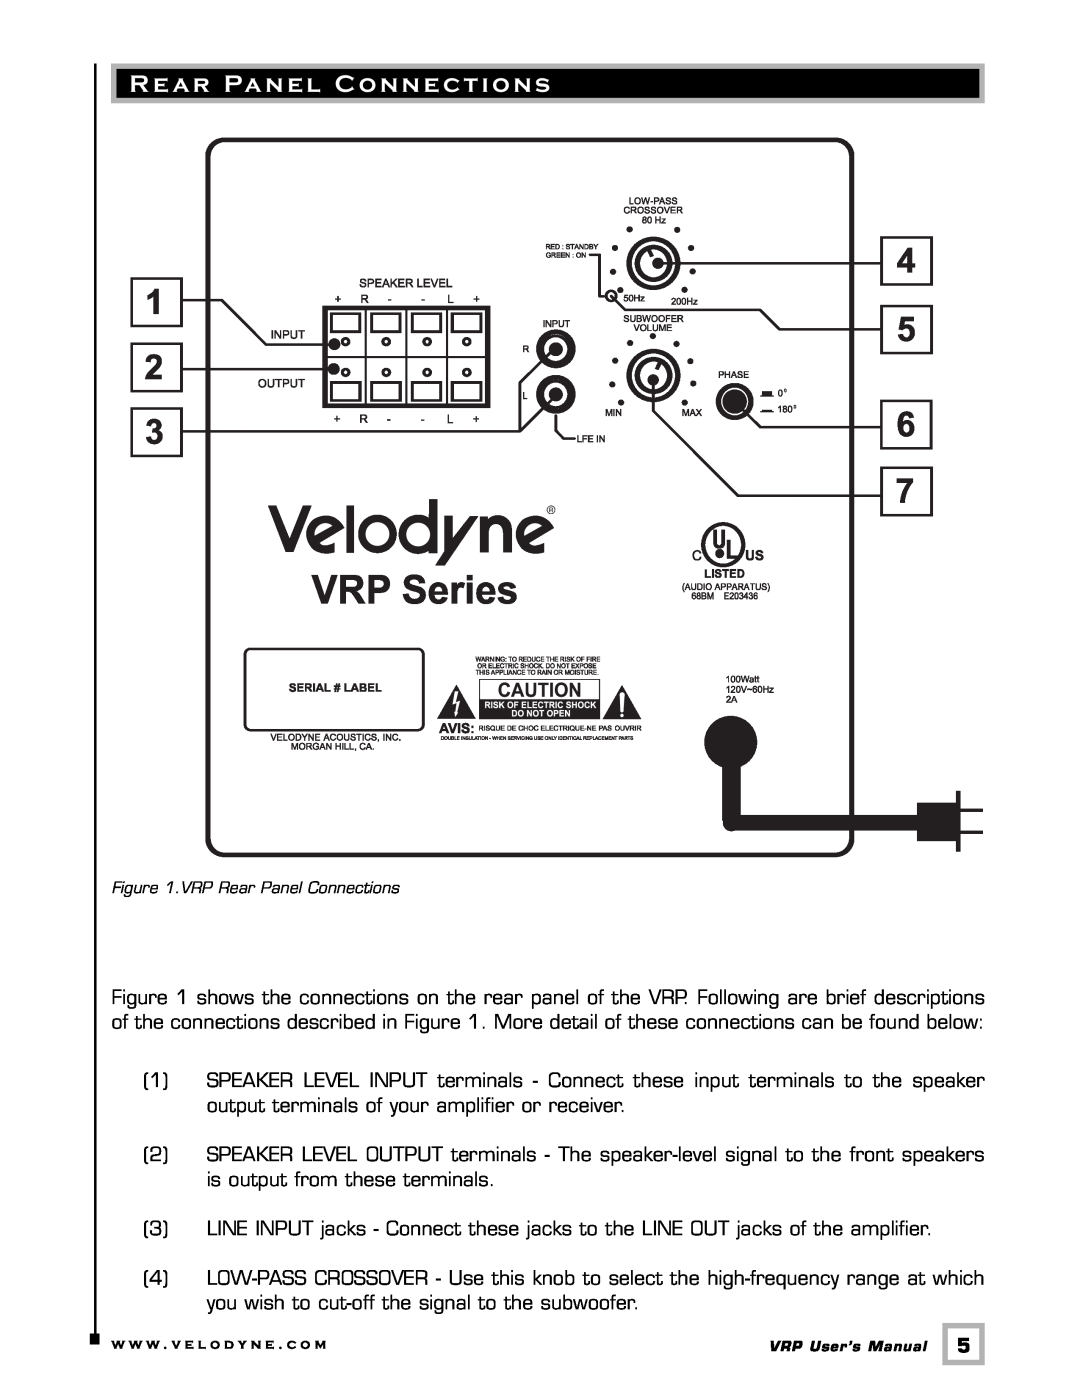 Velodyne Acoustics VRP Series user manual Rear Panel Connections 